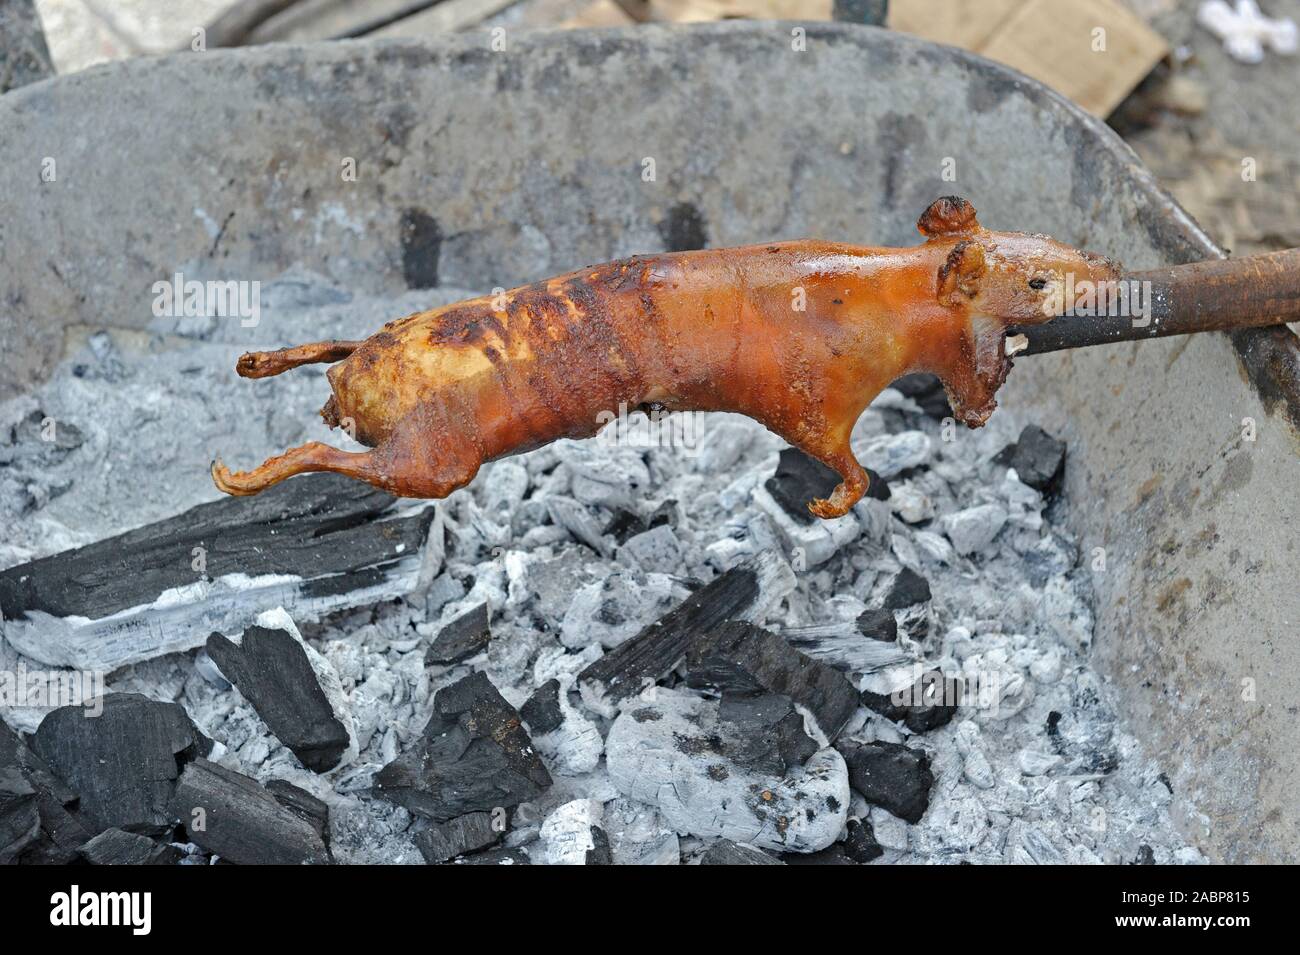 Guinea pig or Cuy as it is called in South America is a local delicacy that’s unique to the highlands of Peru, Bolivia and Ecuador. Stock Photo